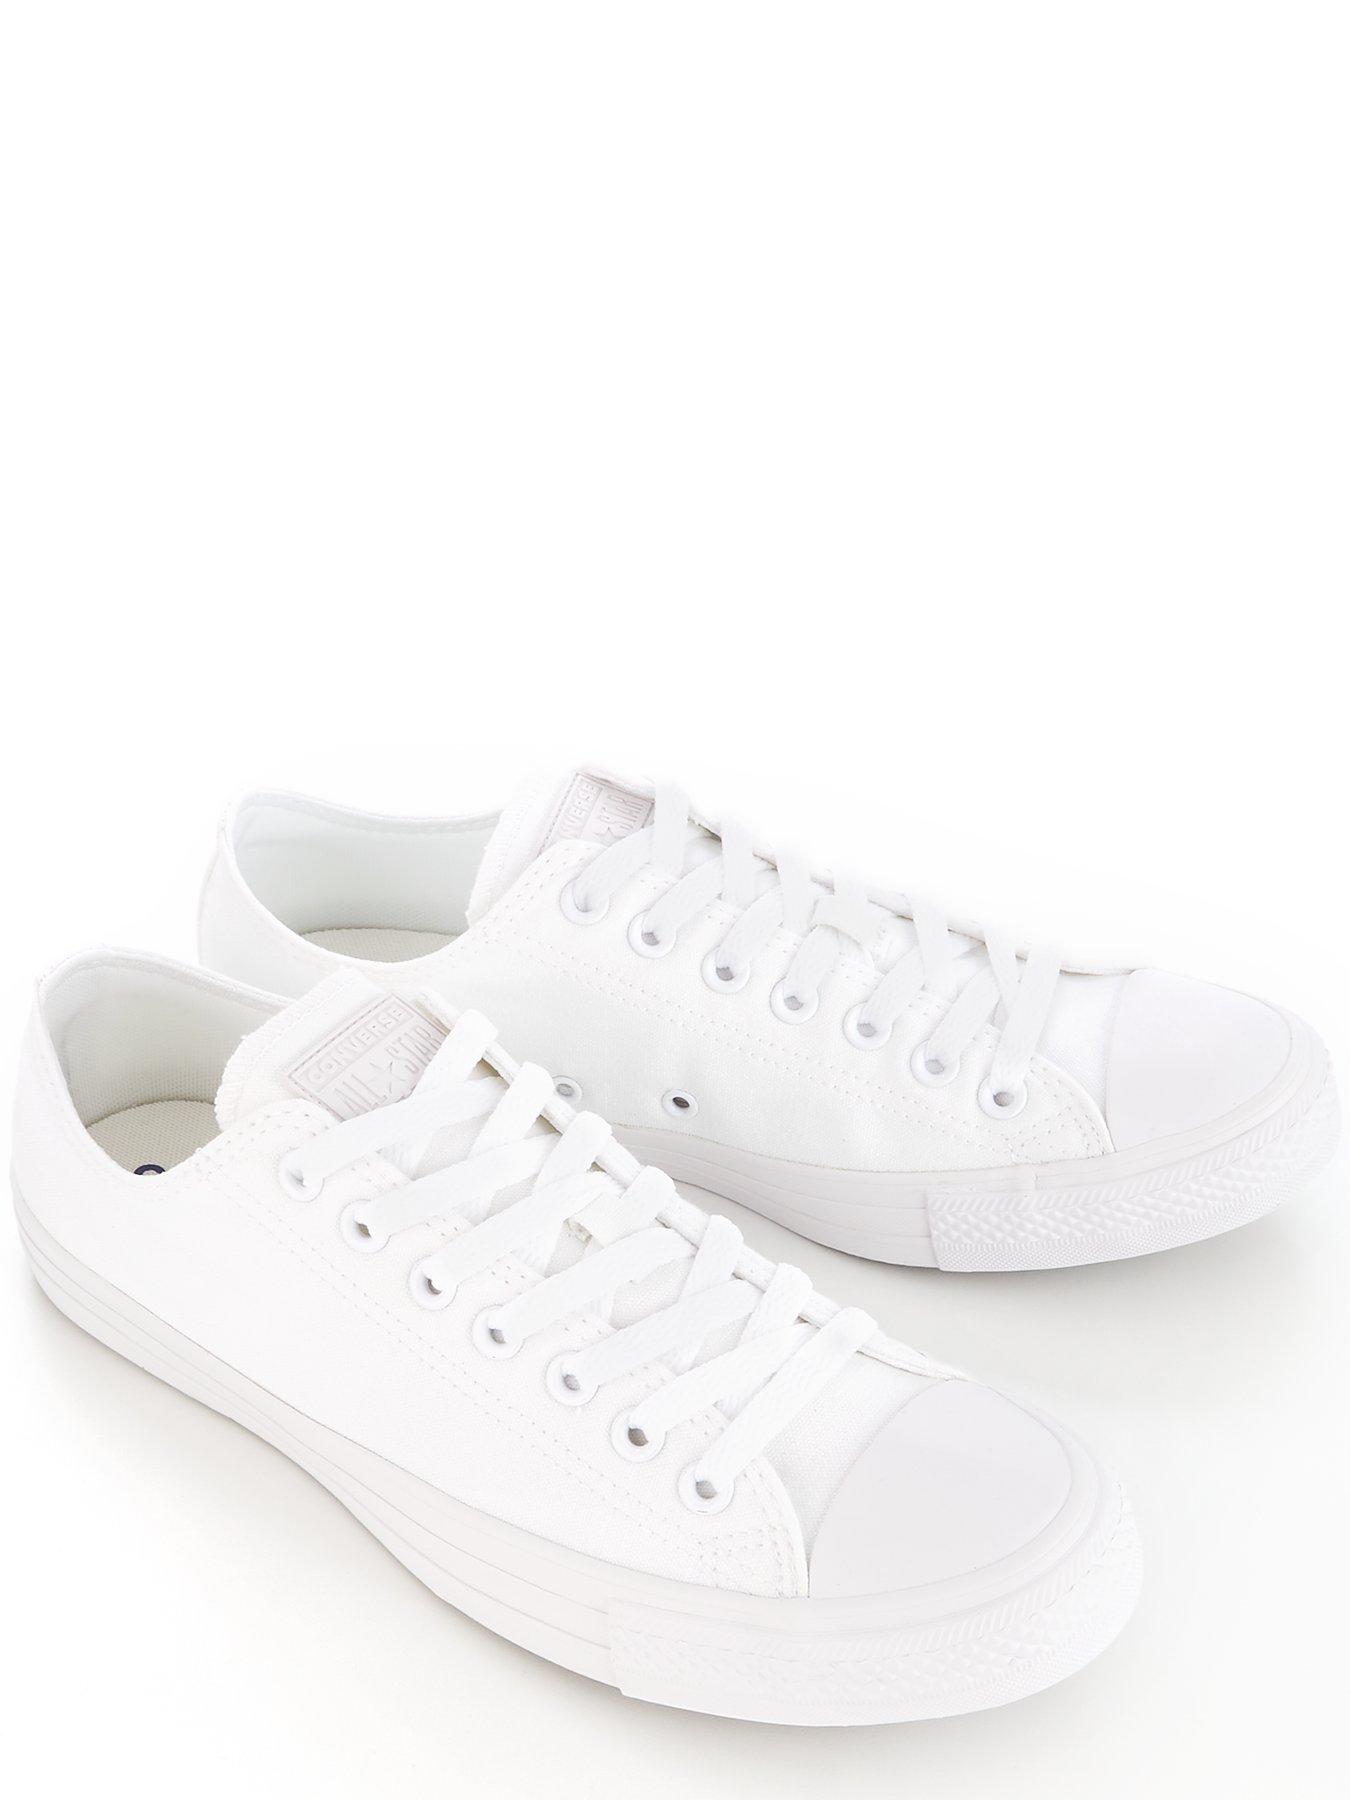 Converse Chuck Taylor All Star Ox - White | very.co.uk